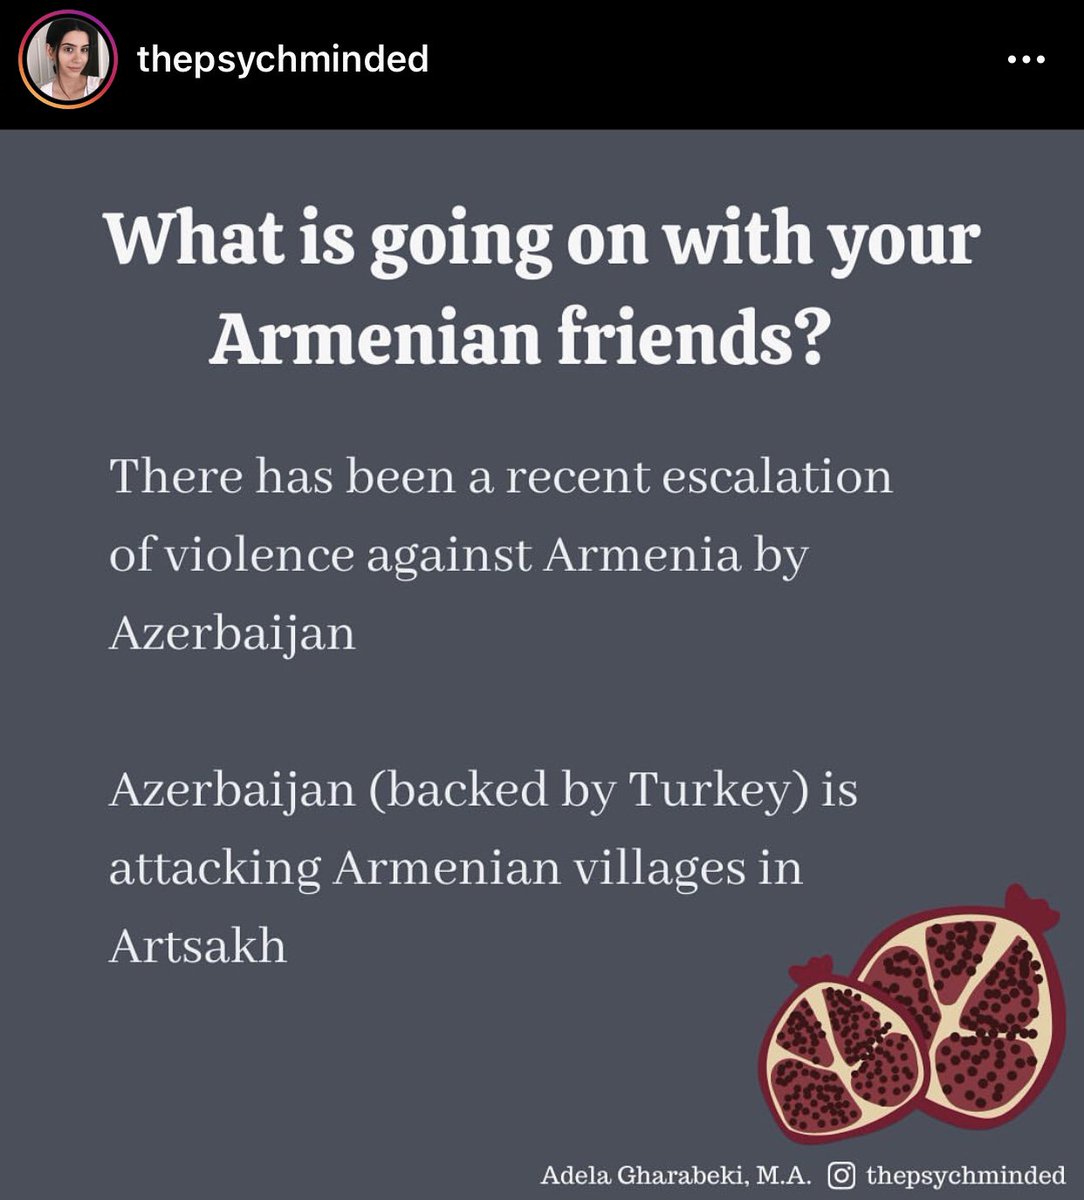 what armenians are going through right now: